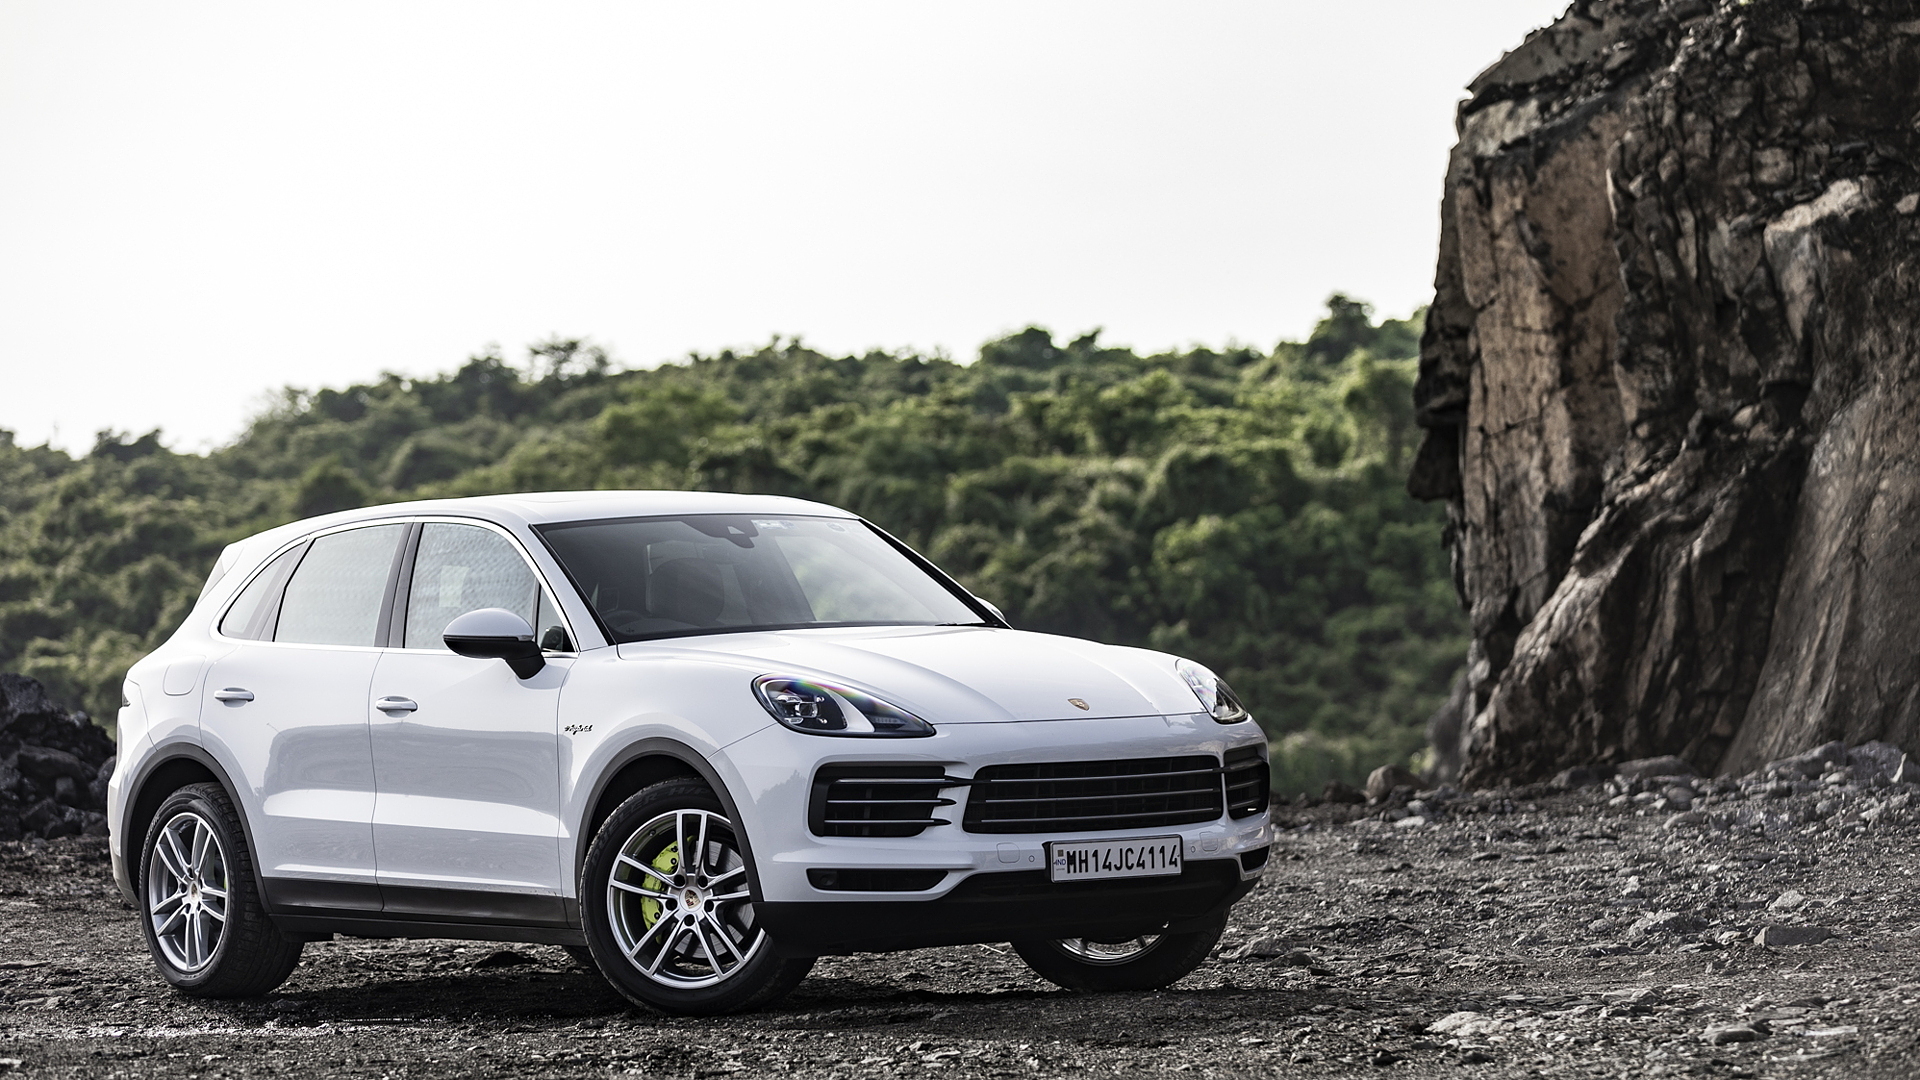 Porsche Cayenne Images - Interior & Exterior Photo Gallery [150+ Images] -  CarWale